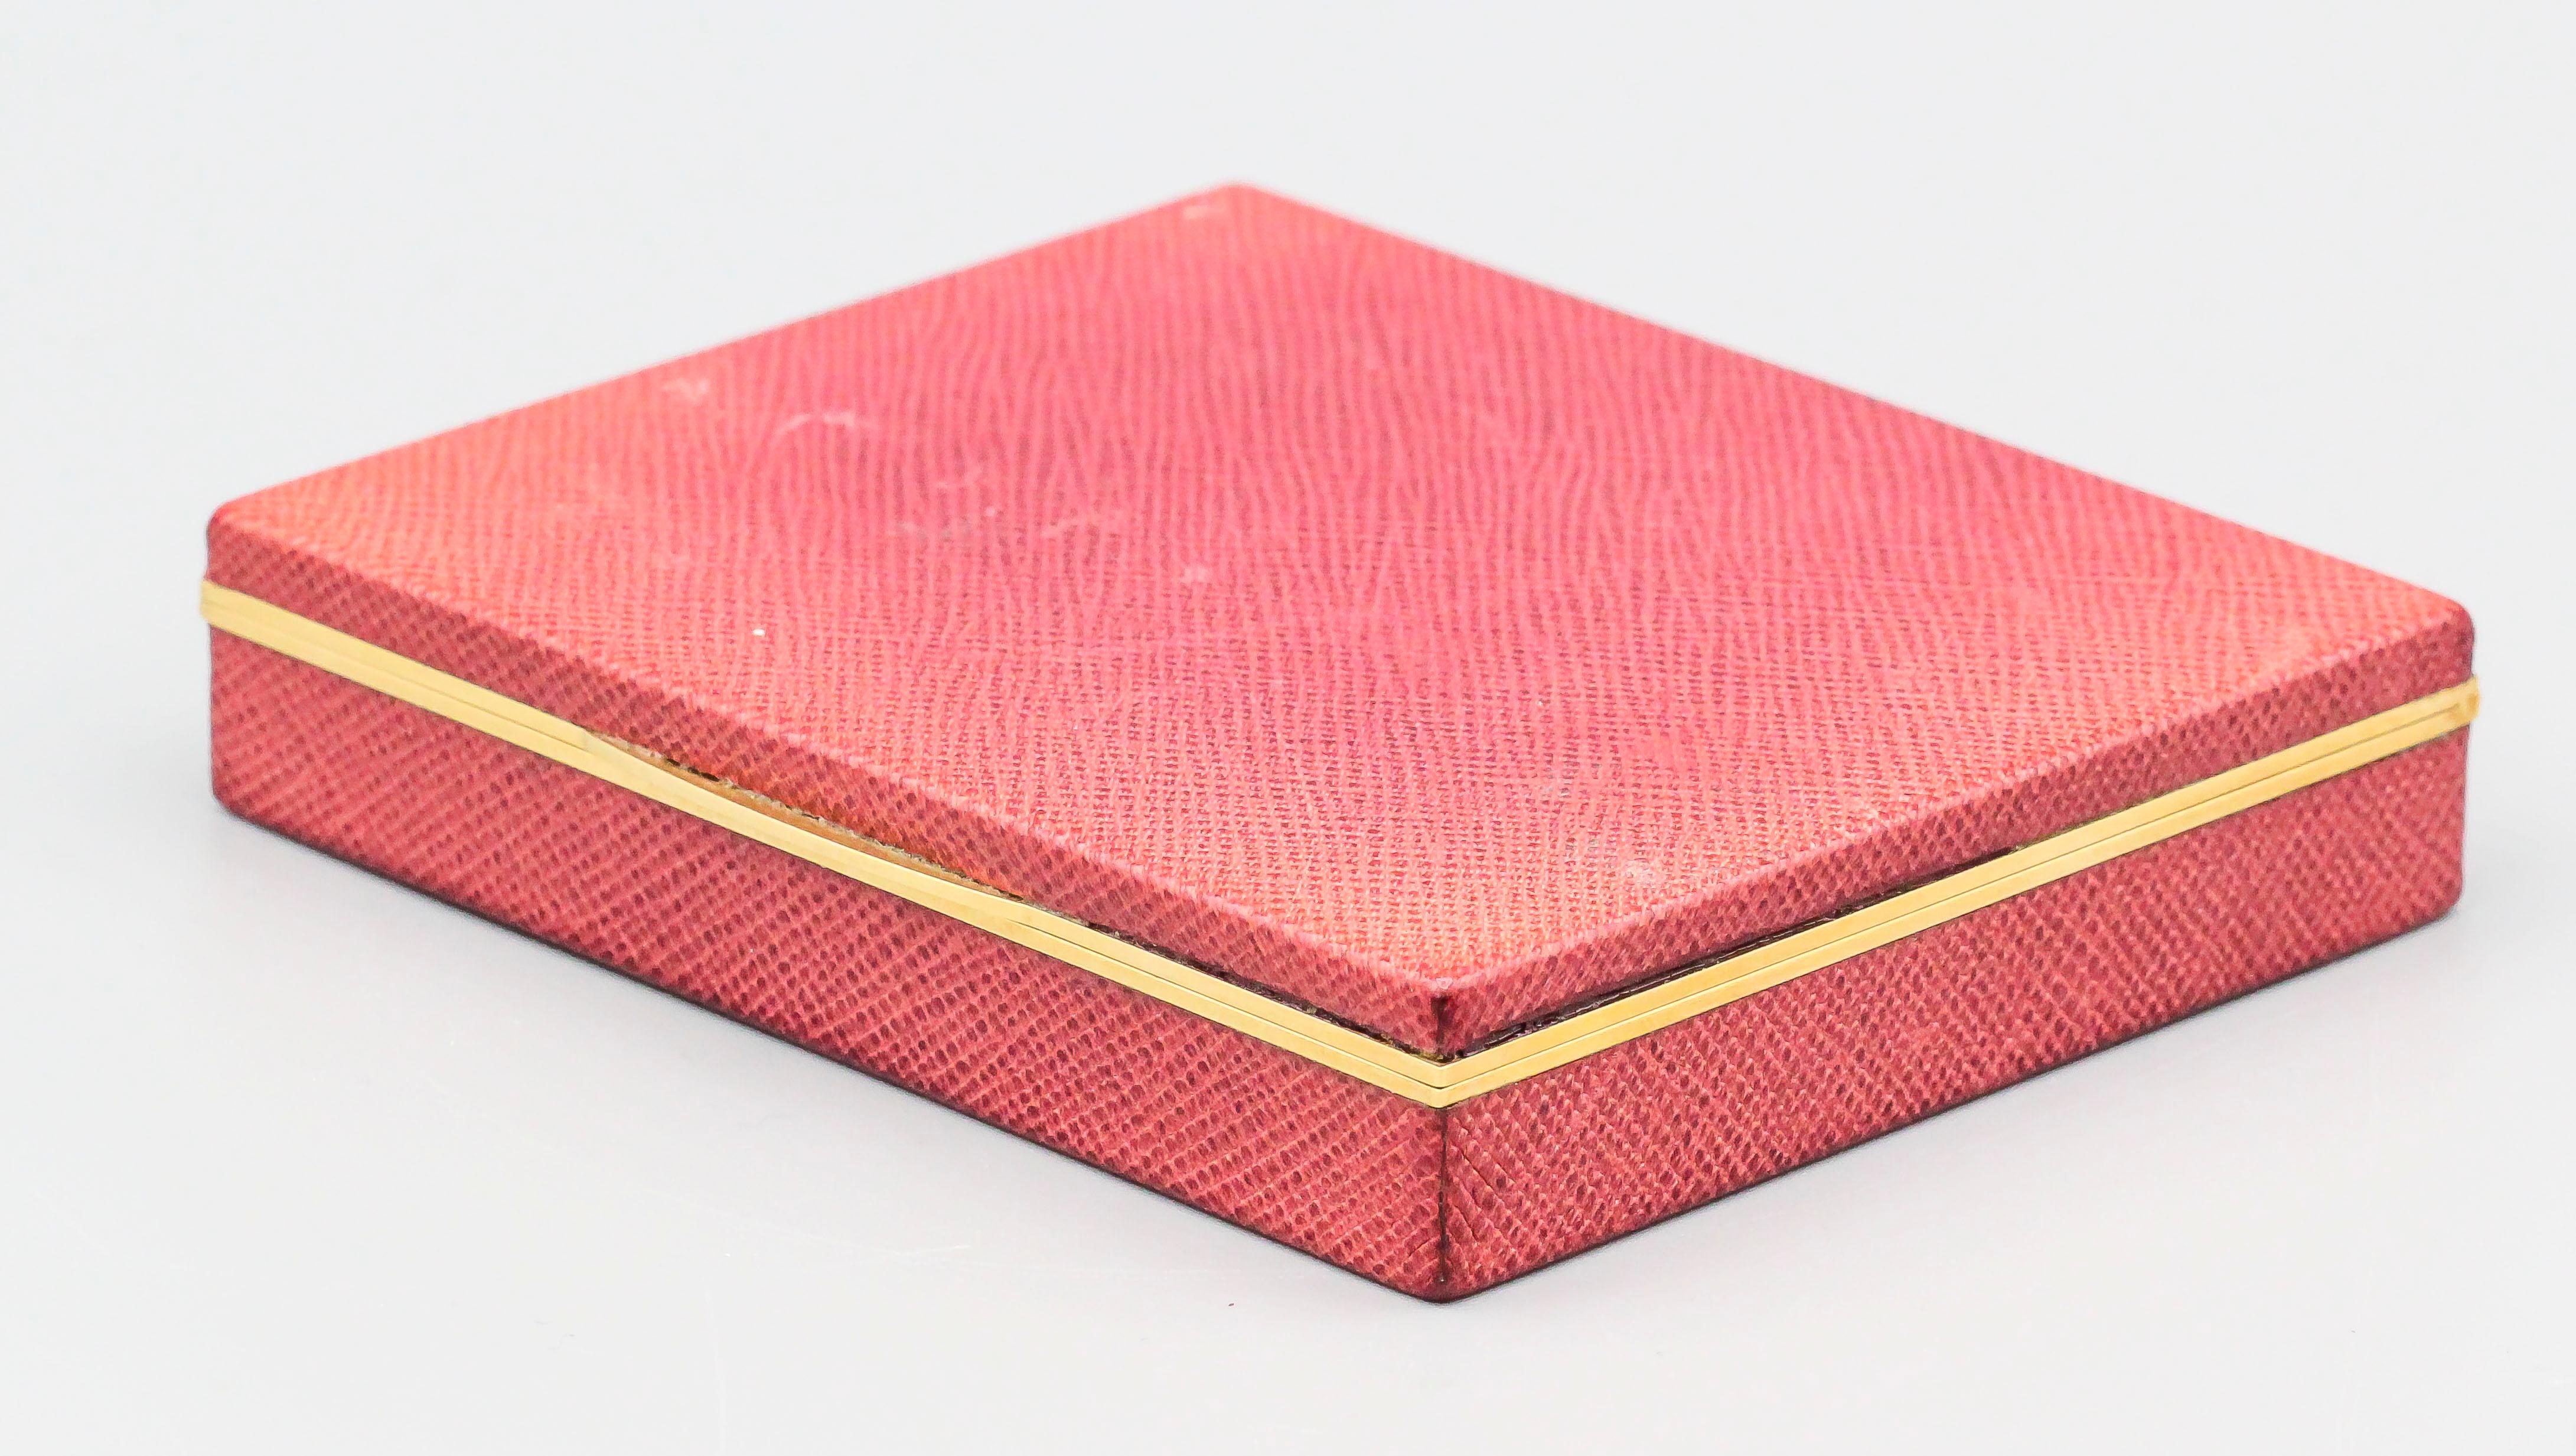 Fine and rare red leather bound 18K yellow gold box by Tiffany & Co. Schlumberger, circa 1970-80s. Measures 3 5/8